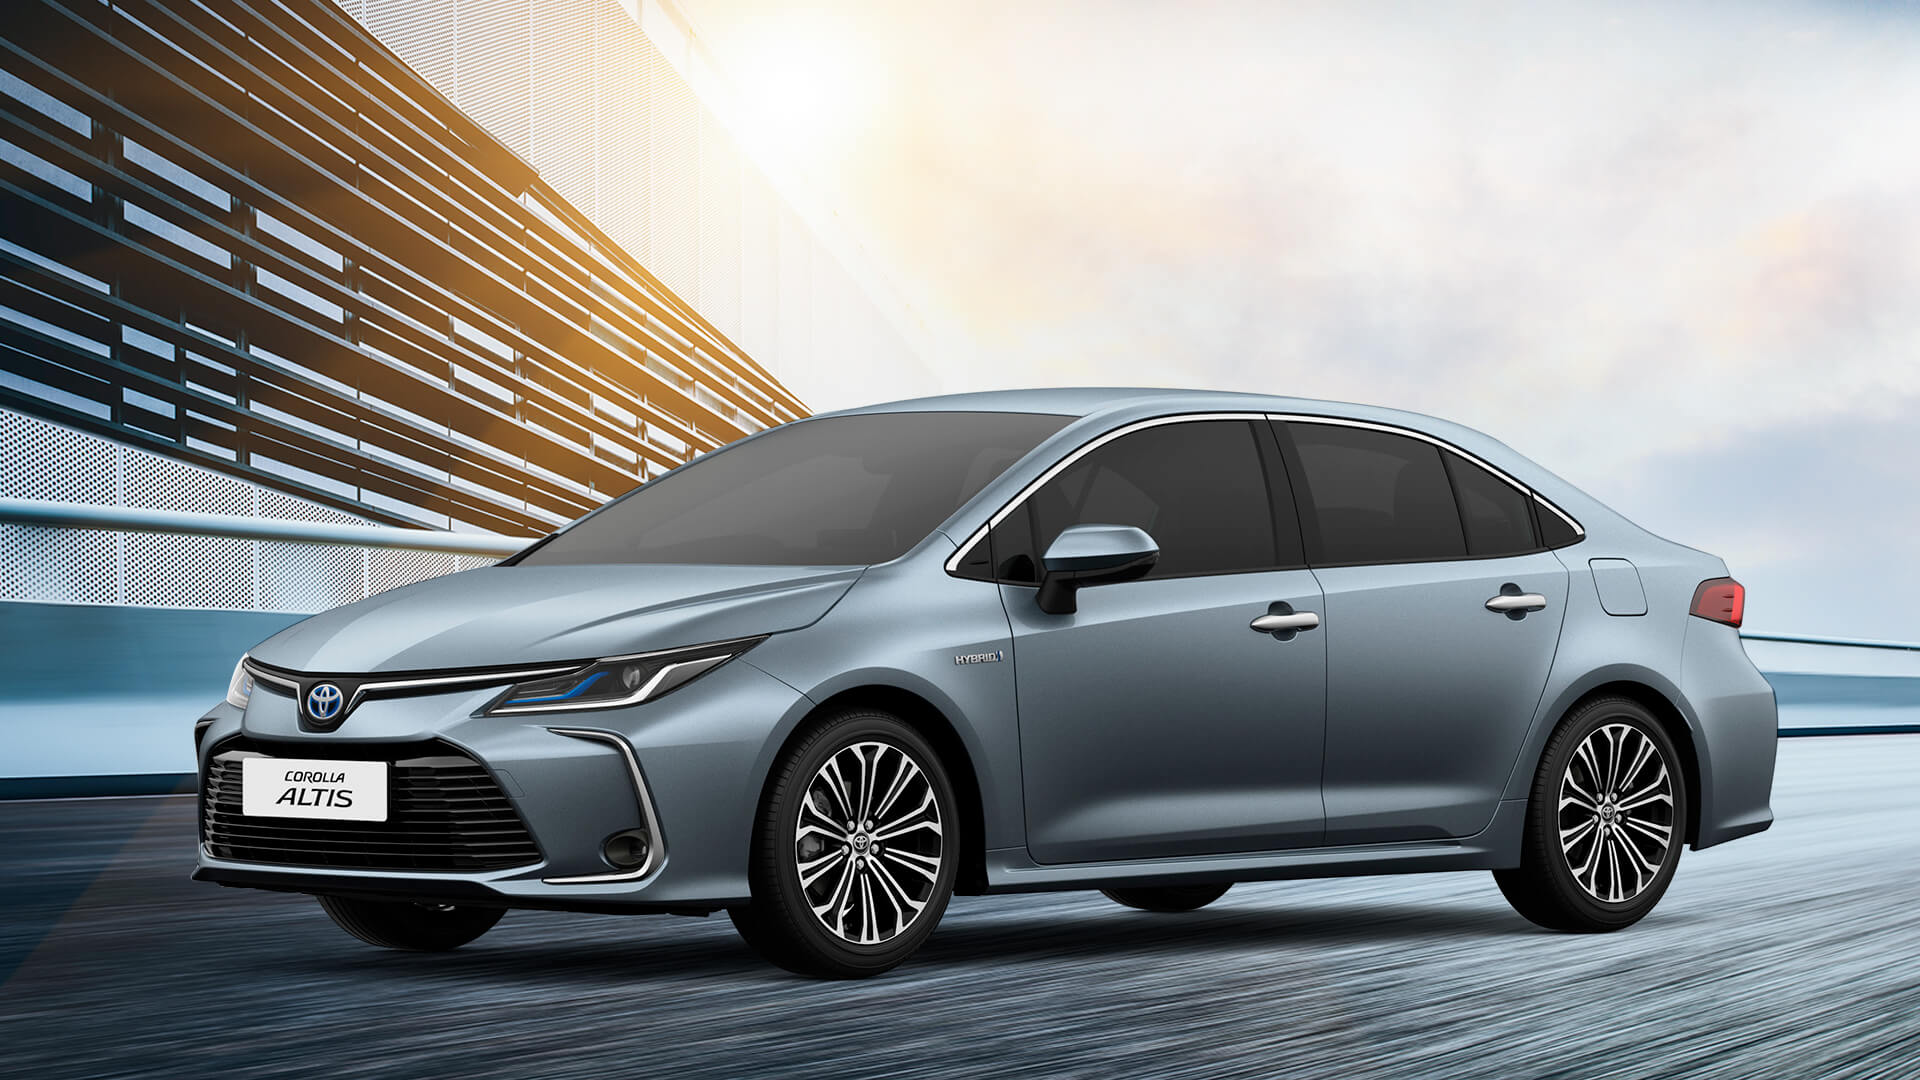 The Toyota Corolla Altis Hybrid offers many benefits to both users and the environment